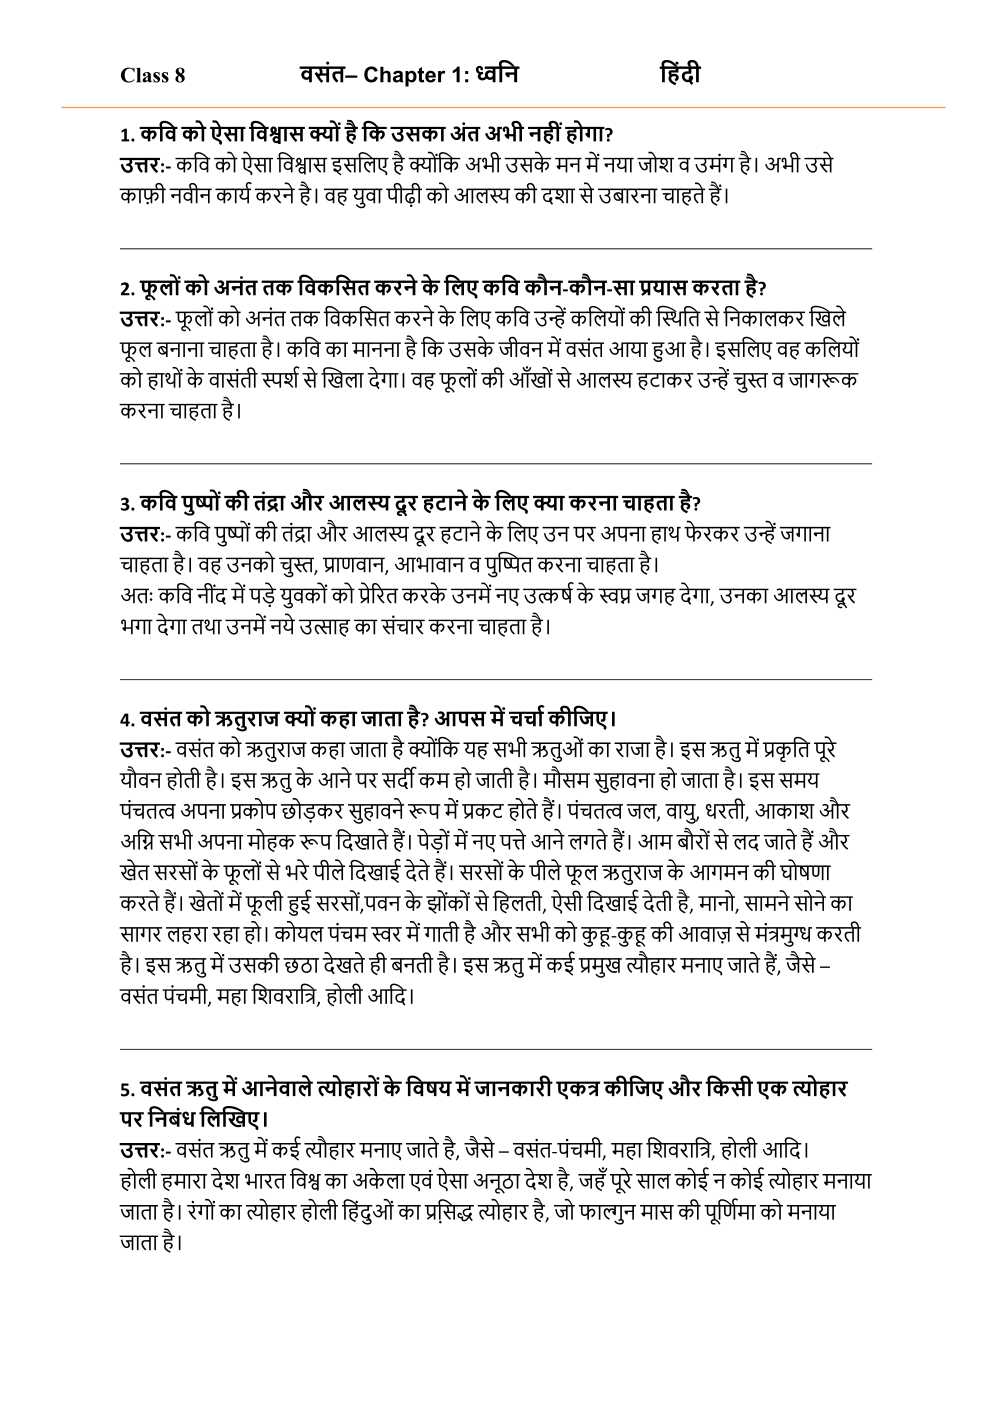 NCERT Solutions For Class 8 Hindi Vasant Chapter 1